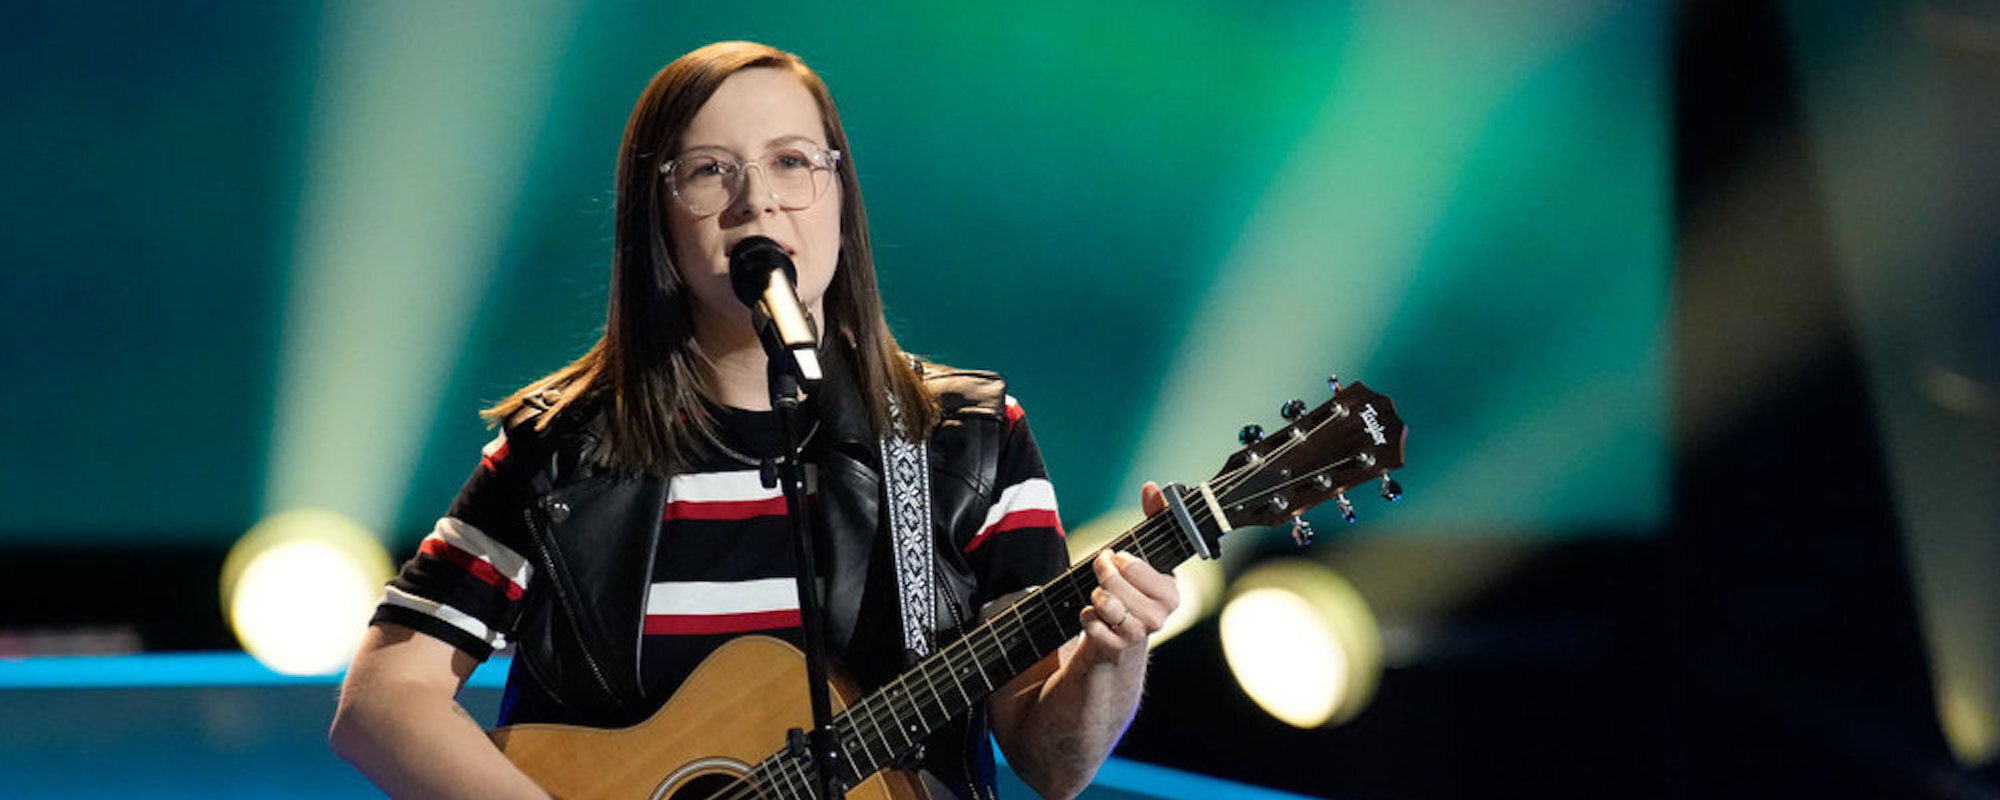 Pregnant Katie Wheatley Tries to Get Judges to Turn on ‘The Voice’